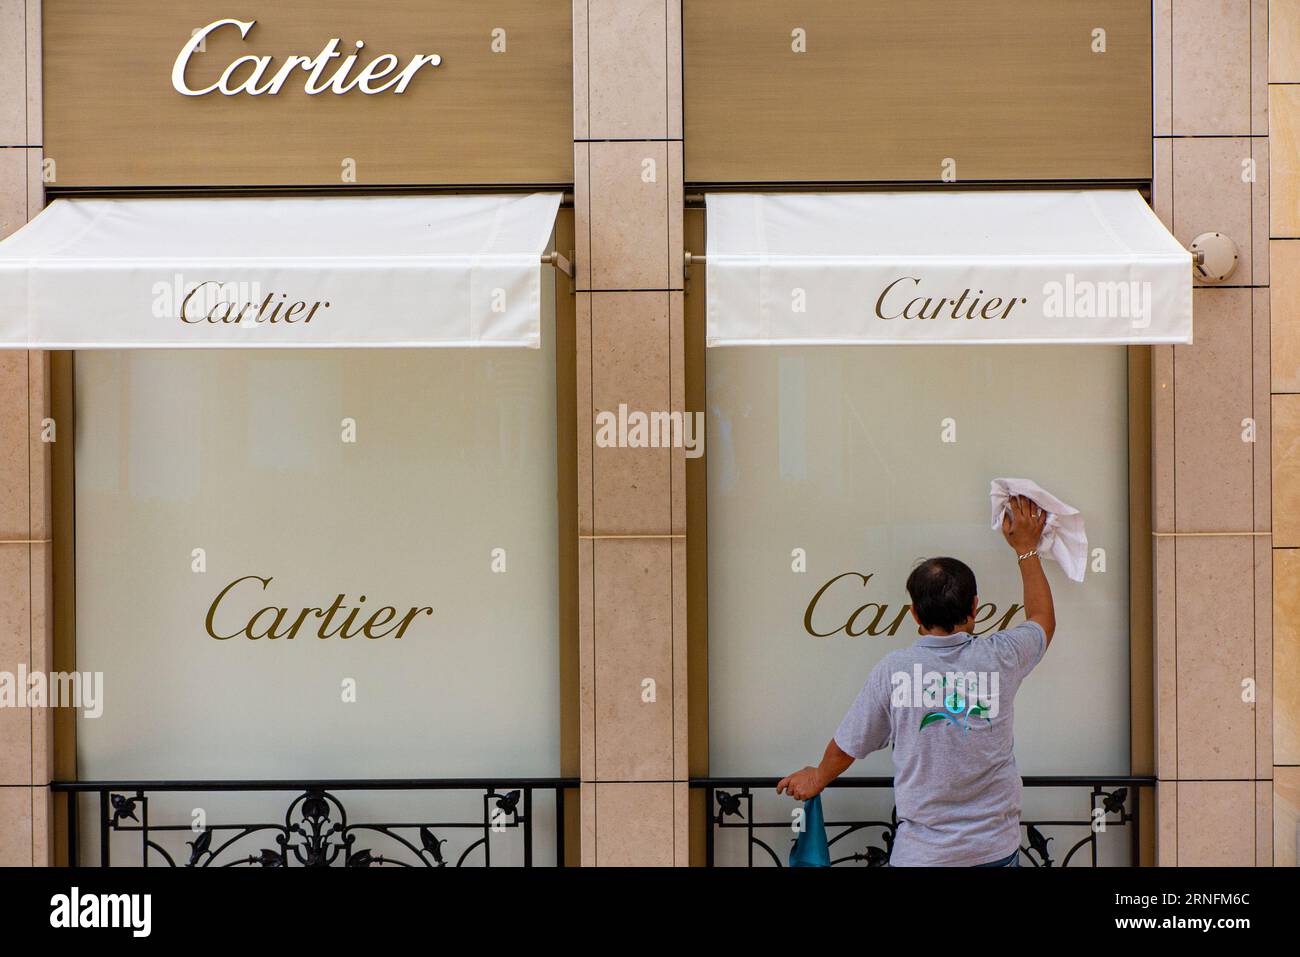 A man cleans the window of a Cartier shop in Monte Carlo, Monaco, France Stock Photo